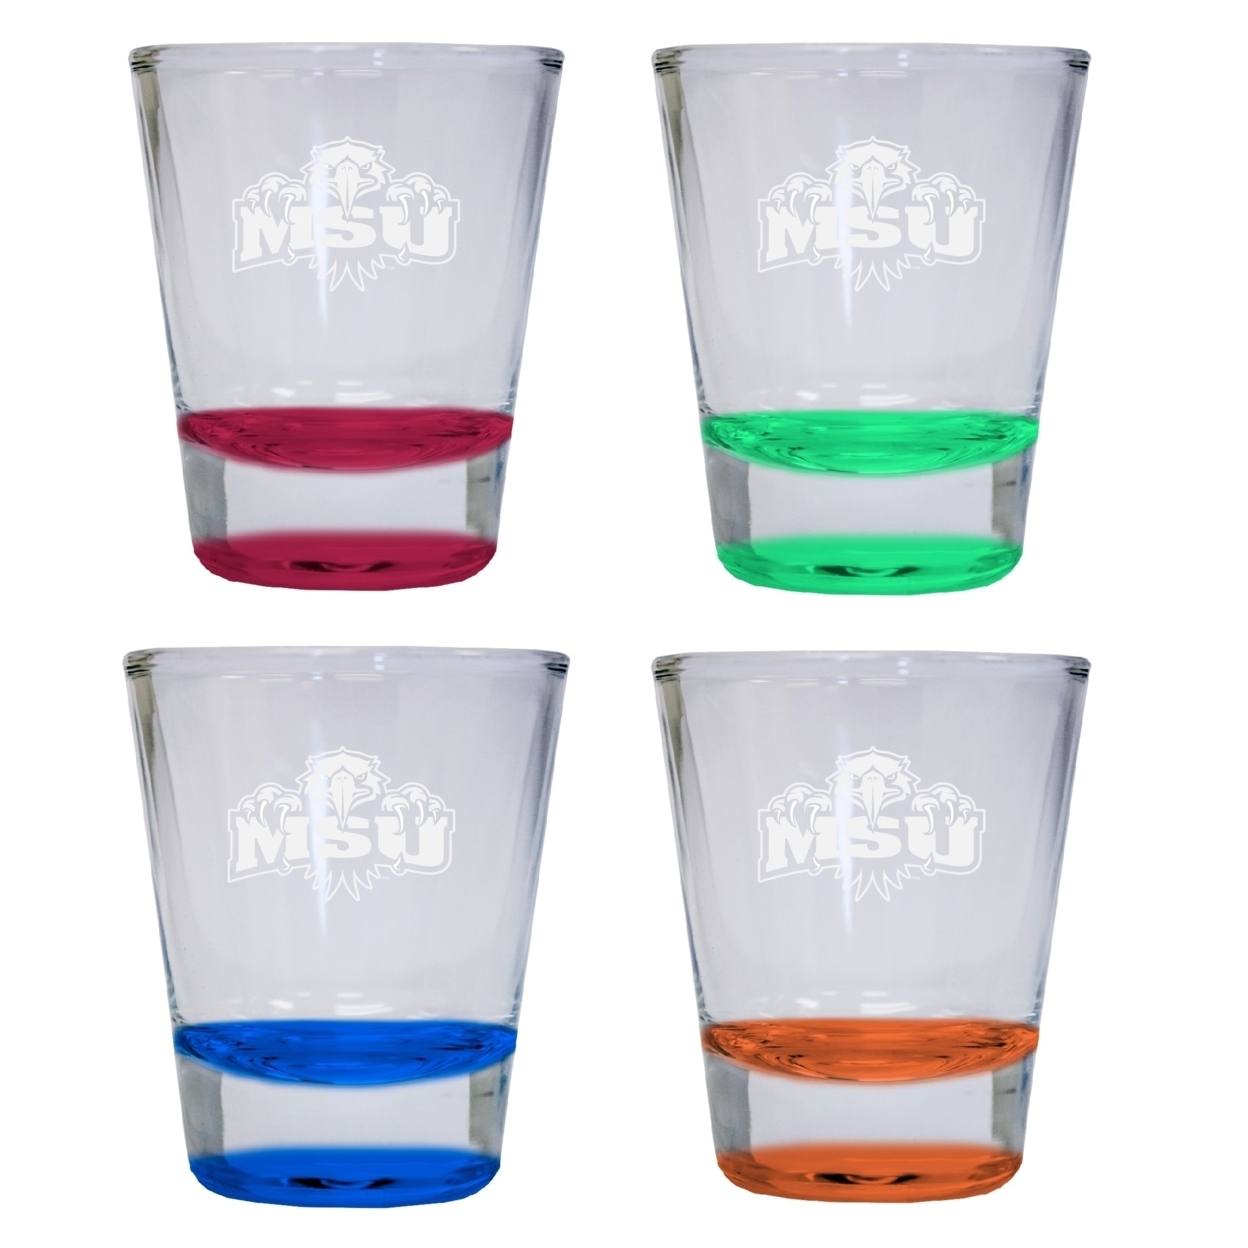 4-Pack Morehead State University Etched Round Shot Glass 2 Oz